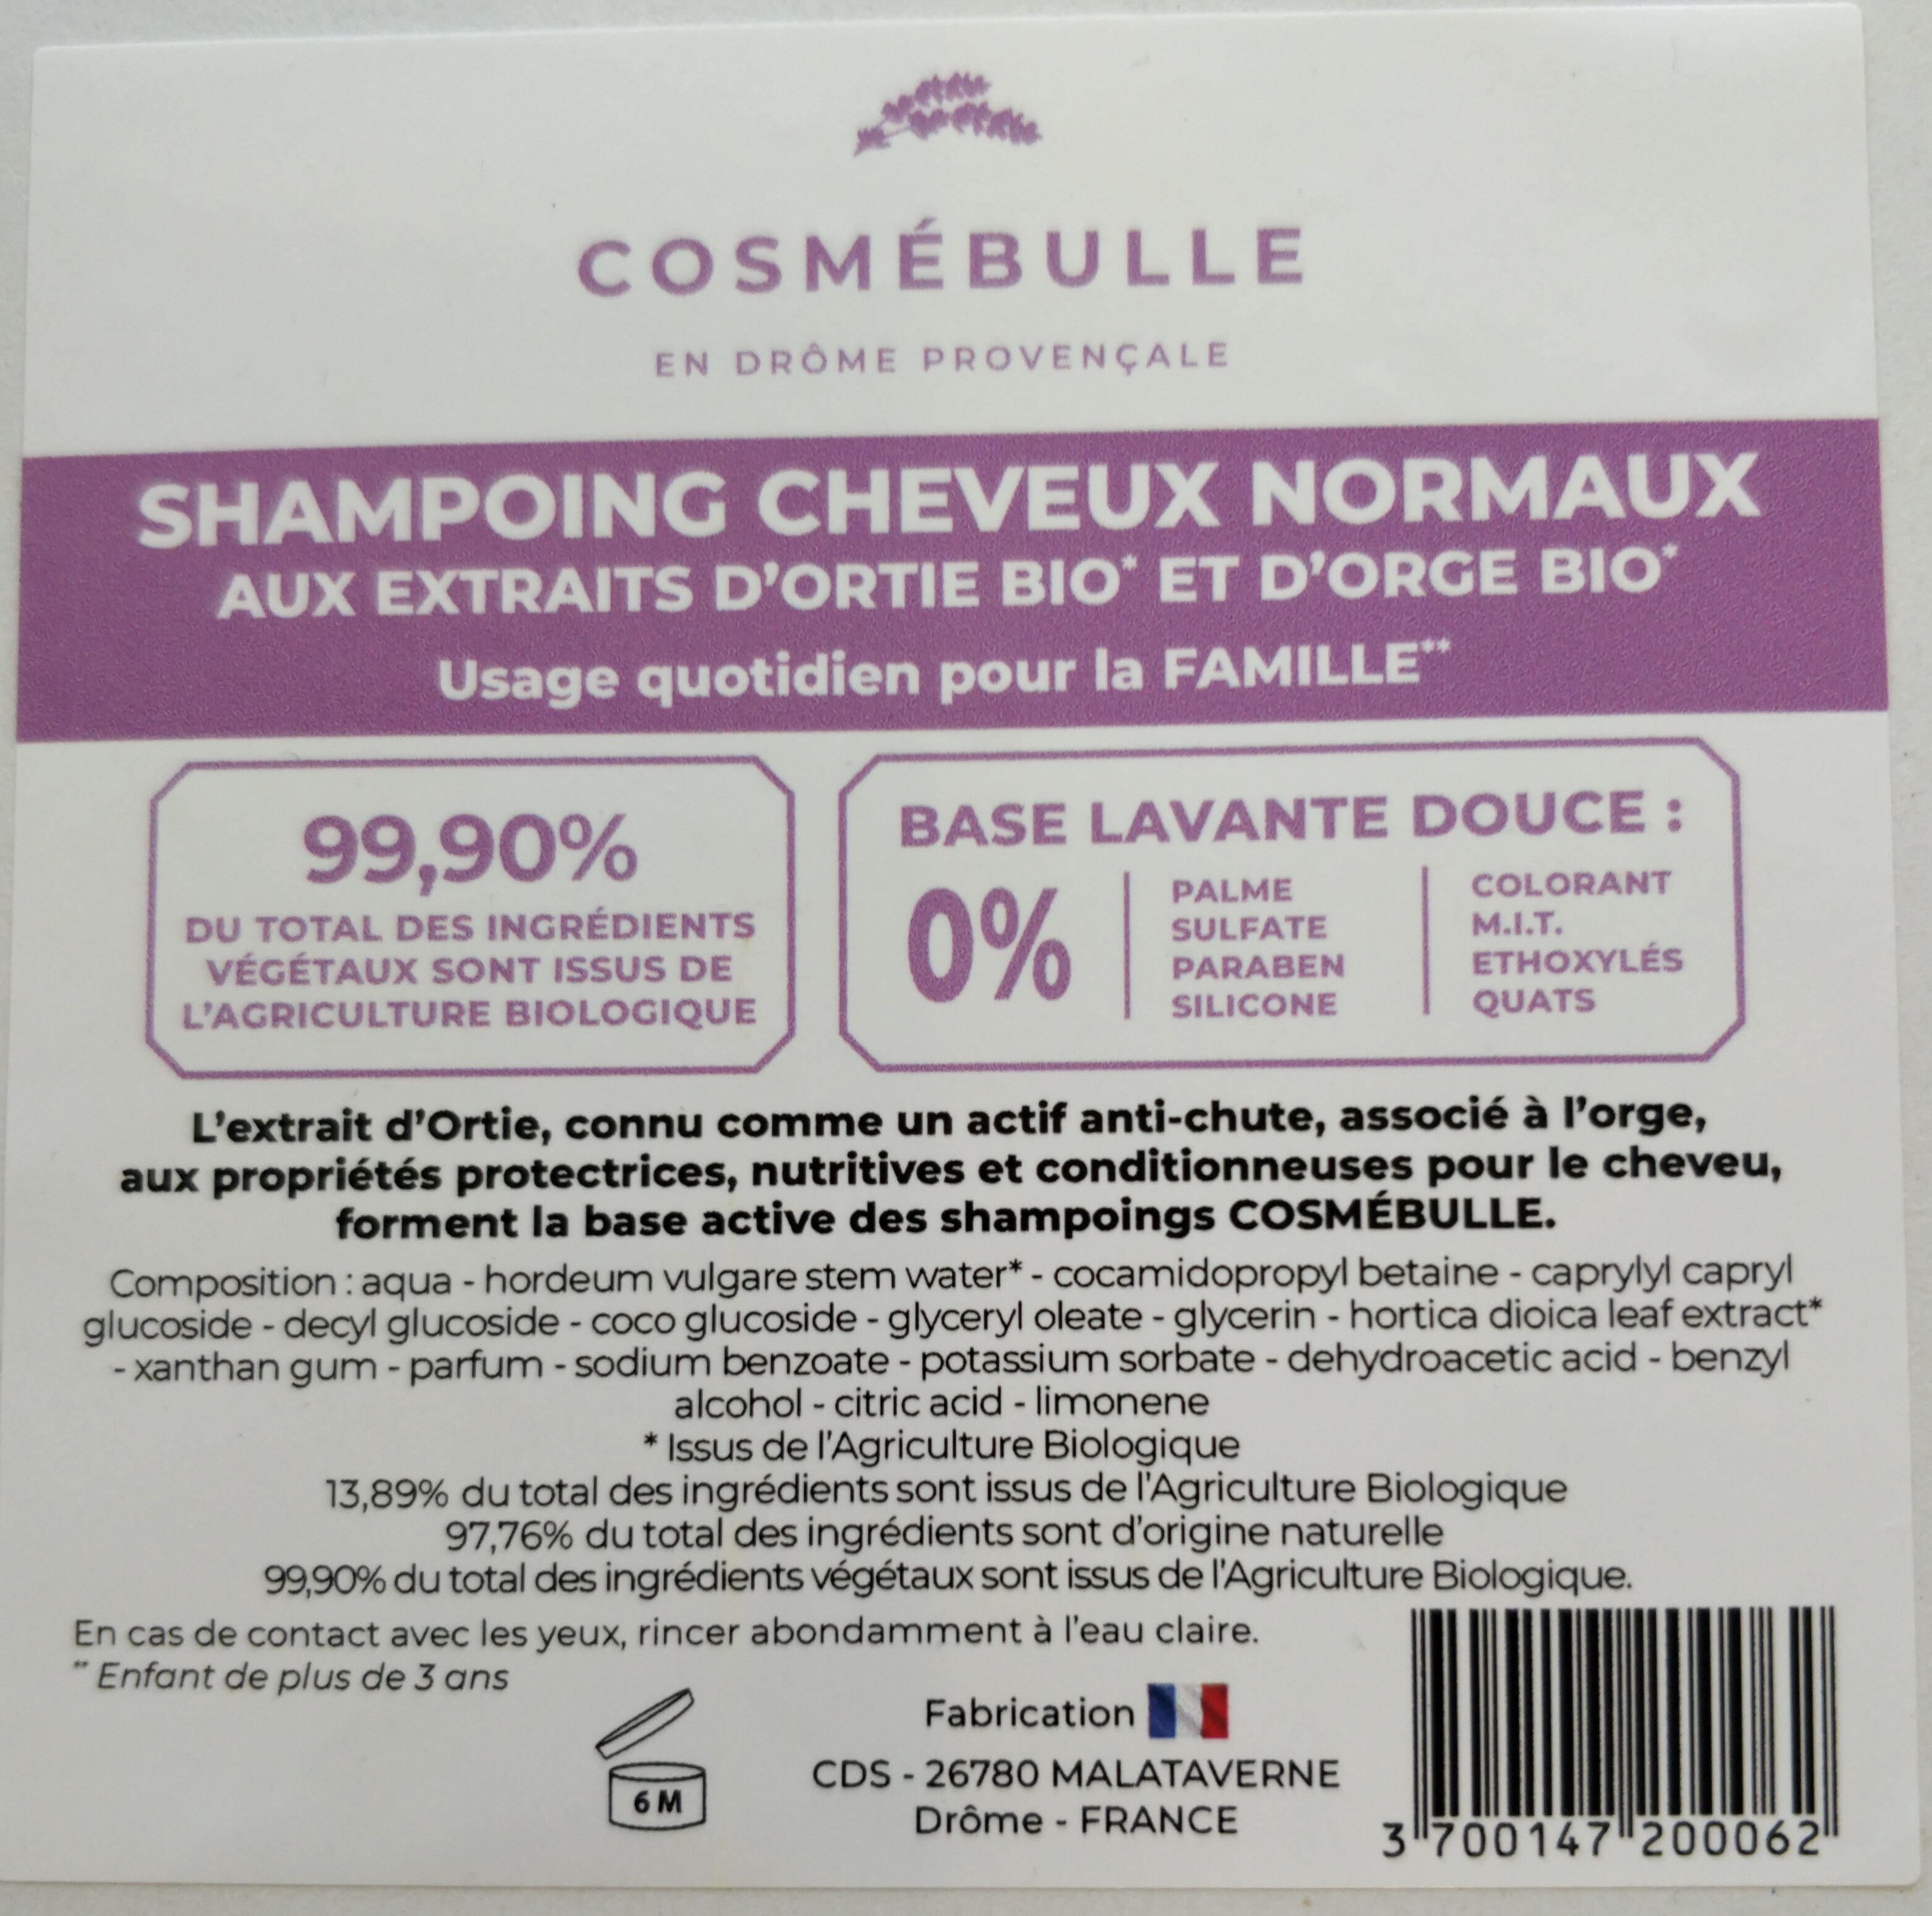 Shampoing cheveux normaux - Produto - fr